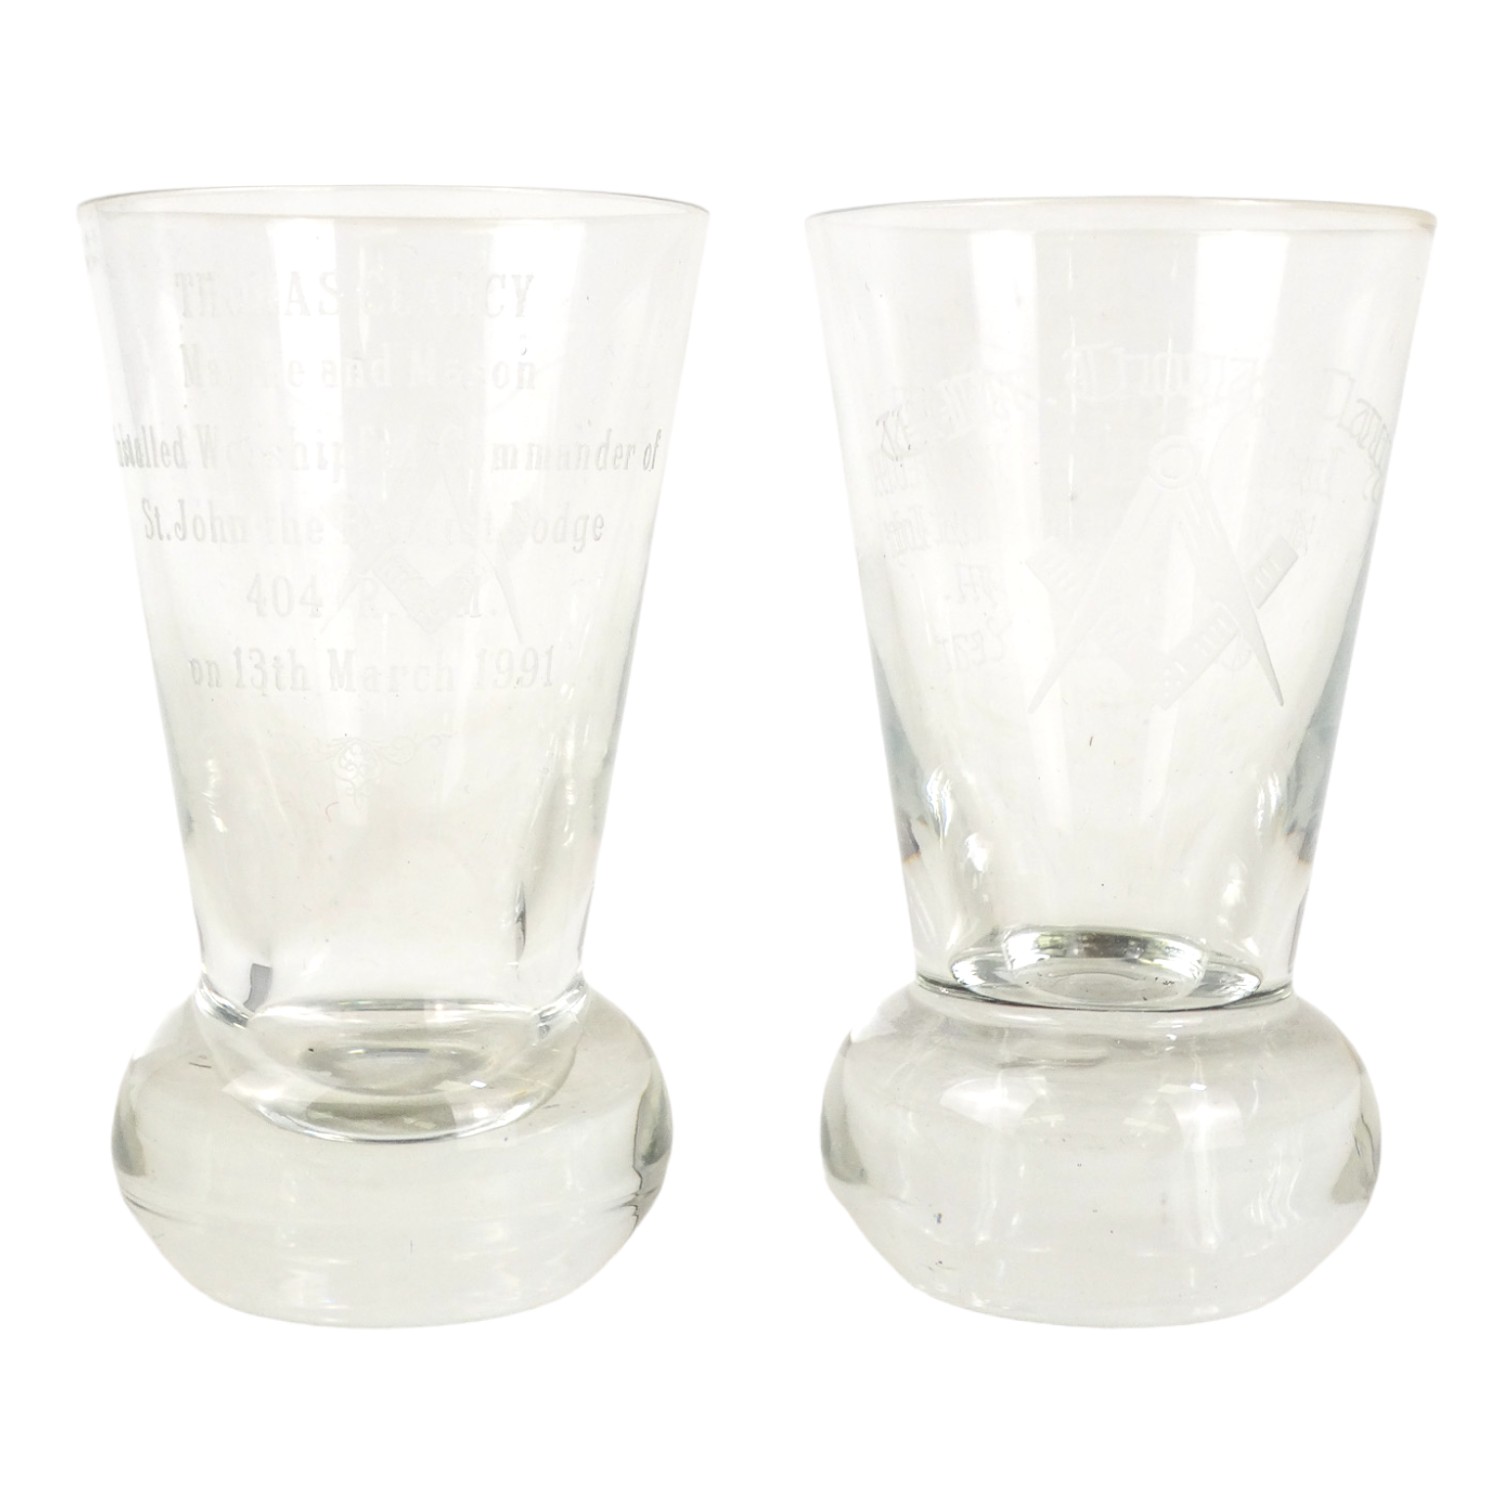 A pair of Freemasons centenary glasses - with etched decoration, height 11cm.